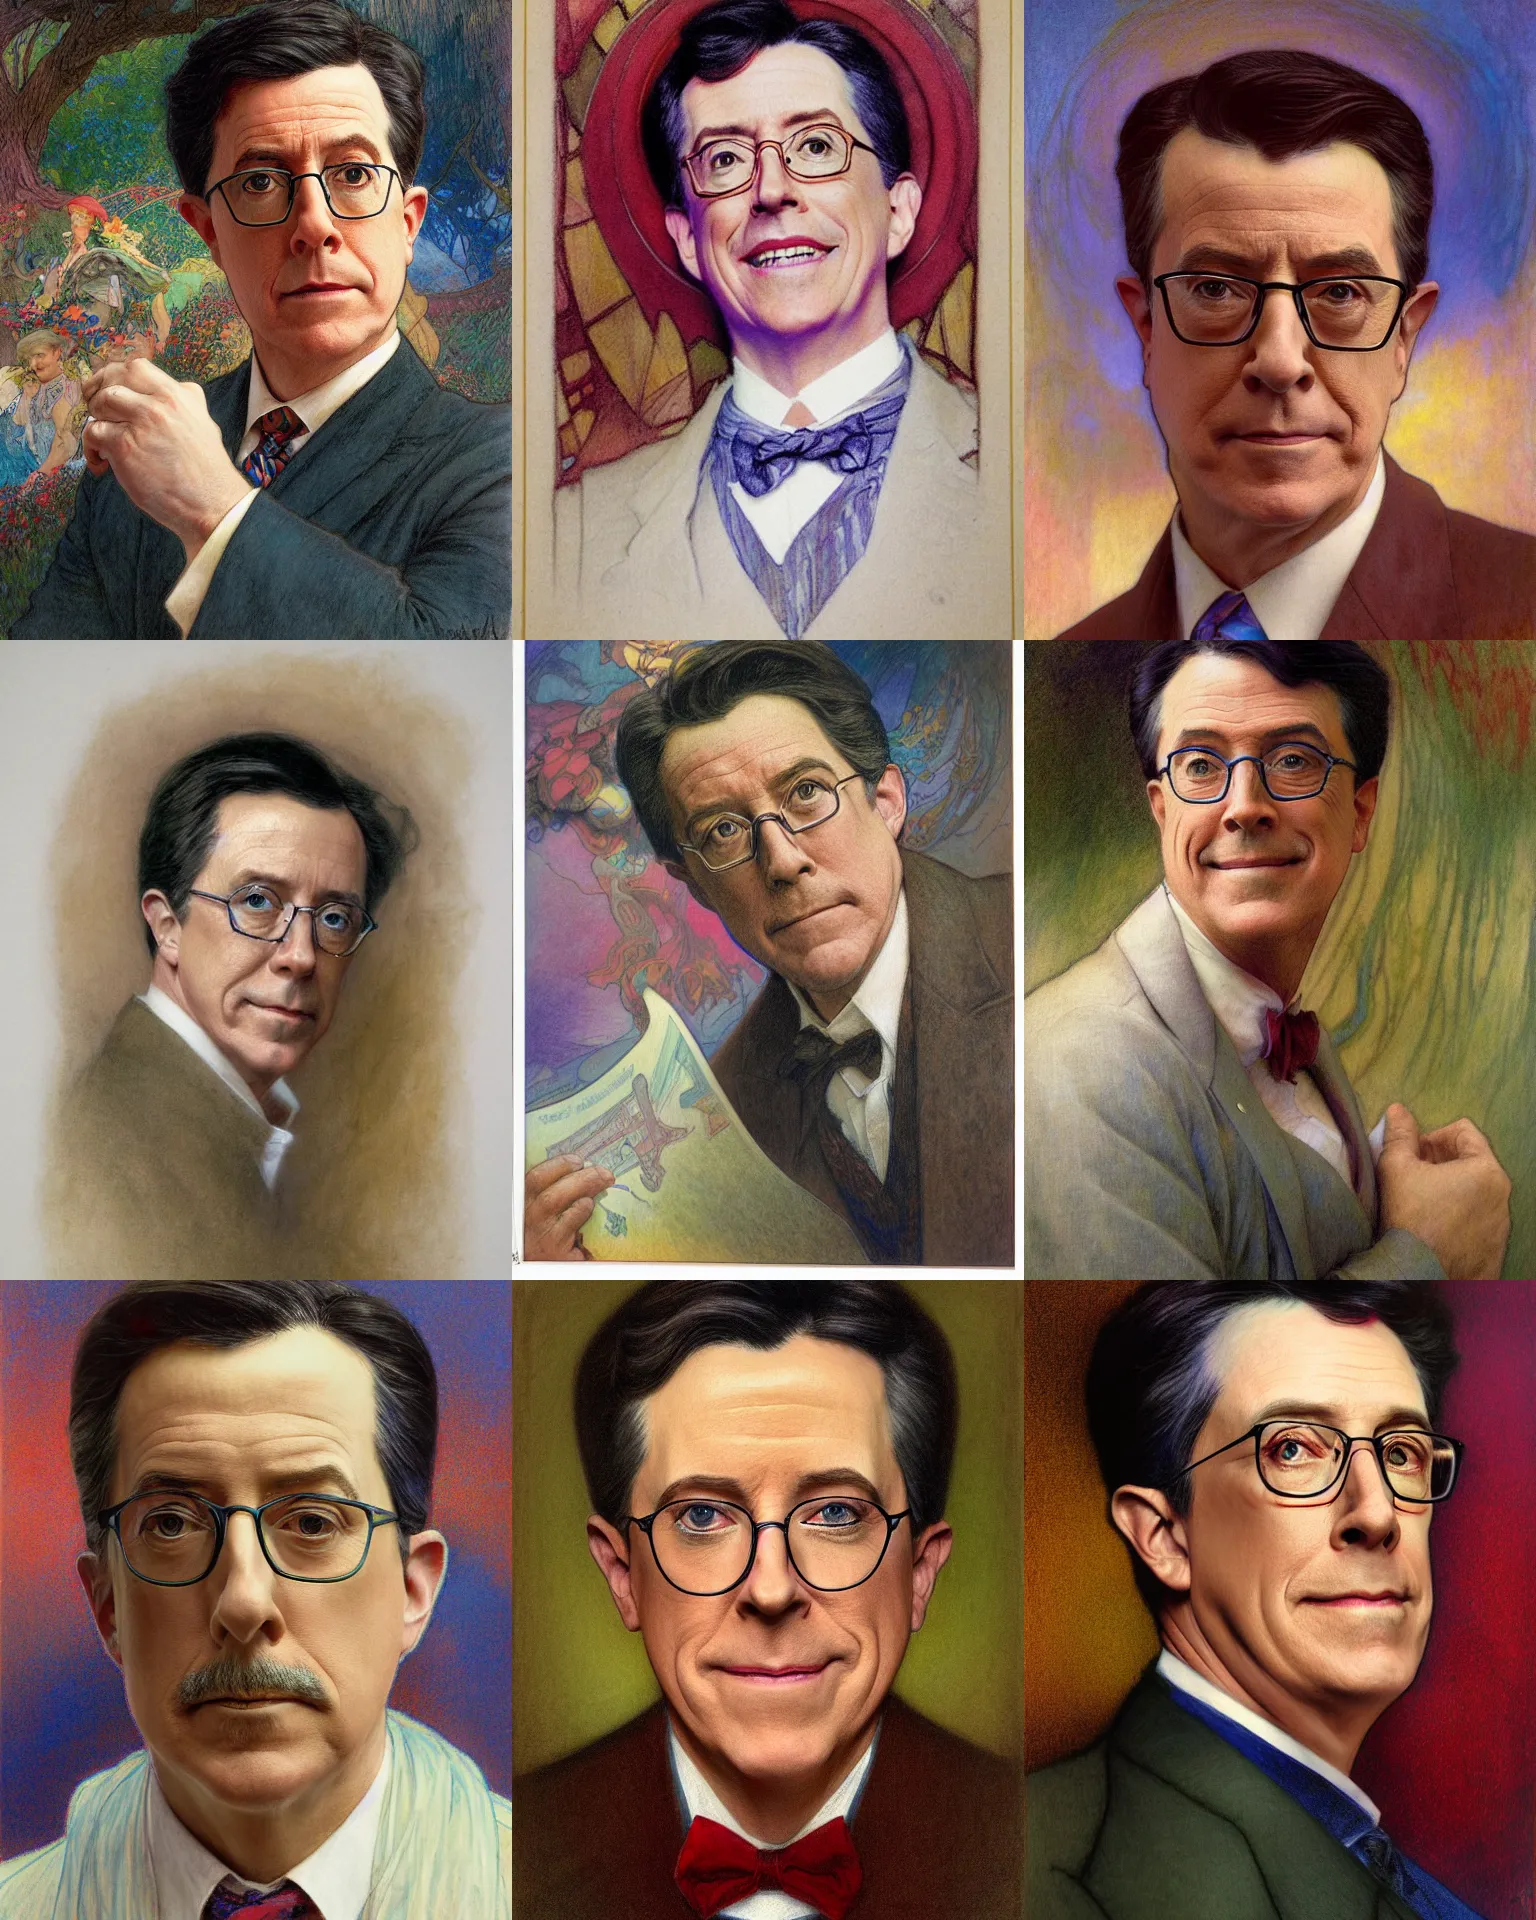 Prompt: colored chalk underdrawing linework portrait of steven colbert with one eyebrow raised by donato giancola, thomas moran, edmund dulac, fans hals, alphonse mucha, fashion photography, fully clothed